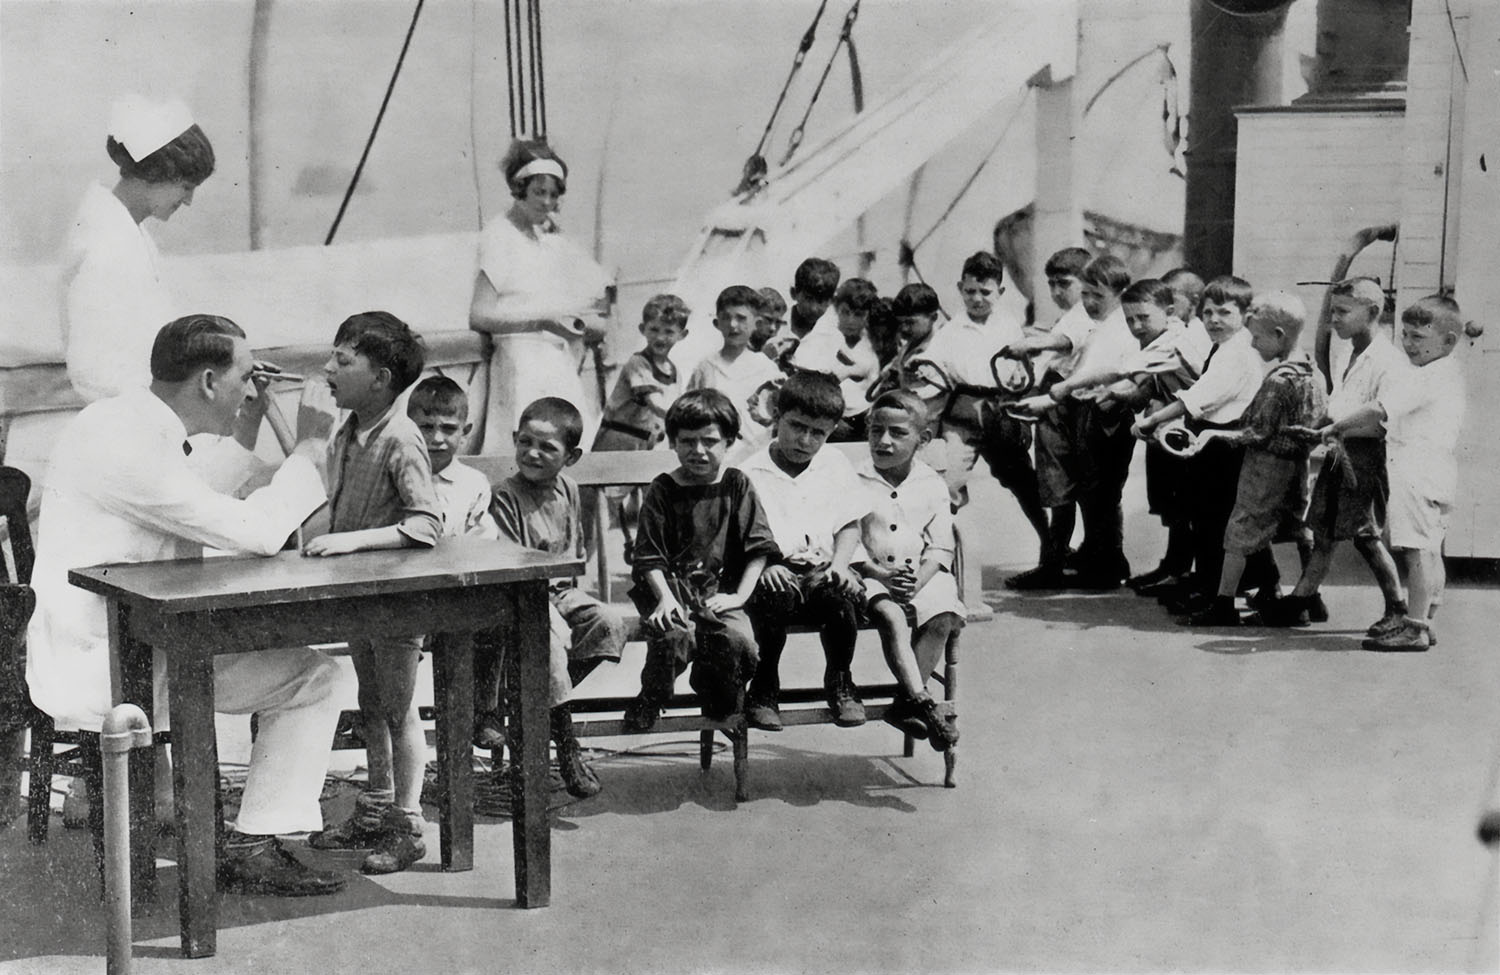 Doctor checking a line of boys on deck, 1920s